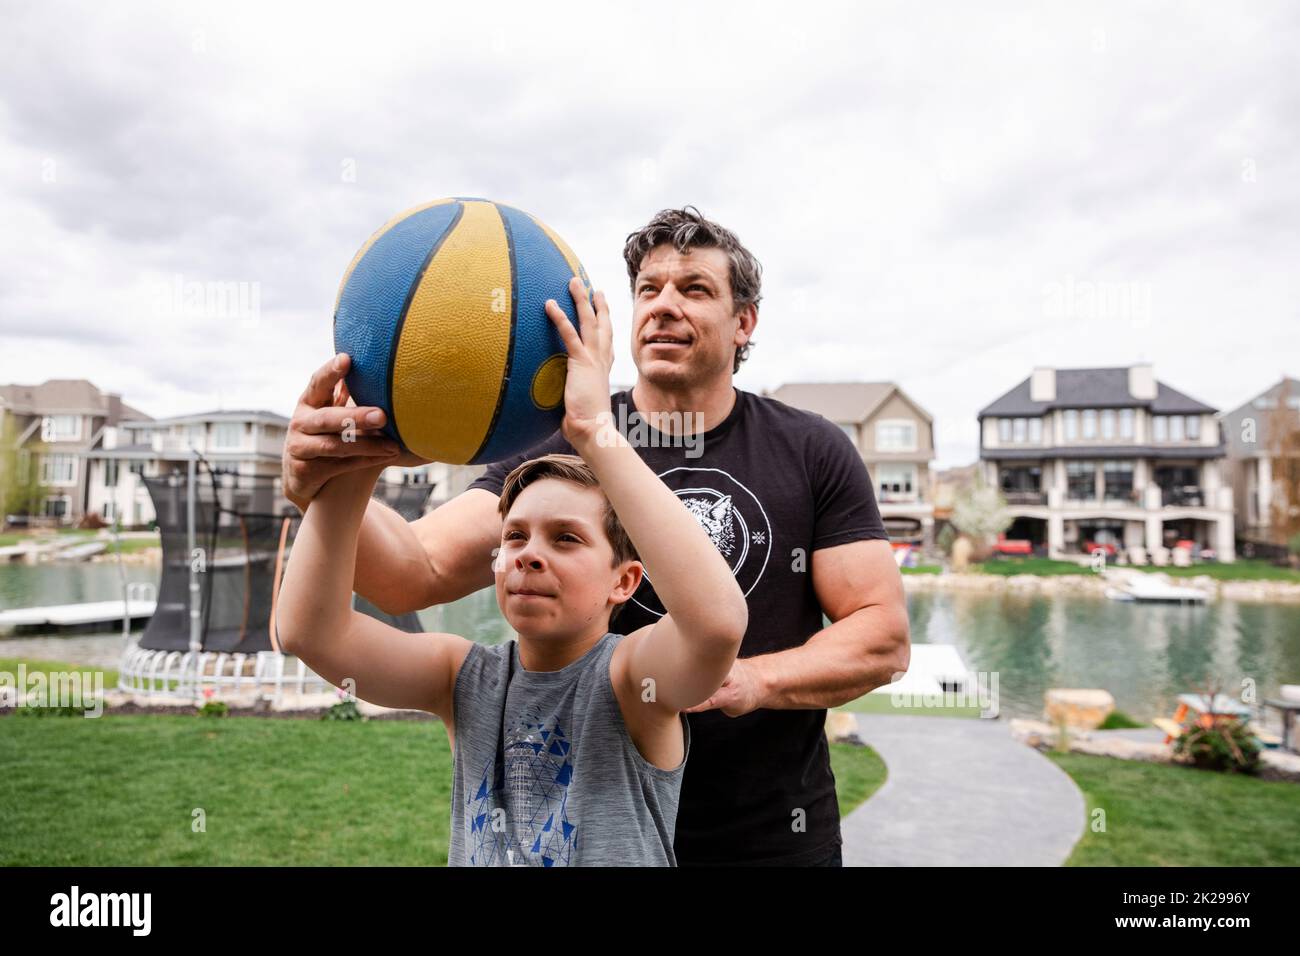 Father teaching son to aim at basketball Stock Photo